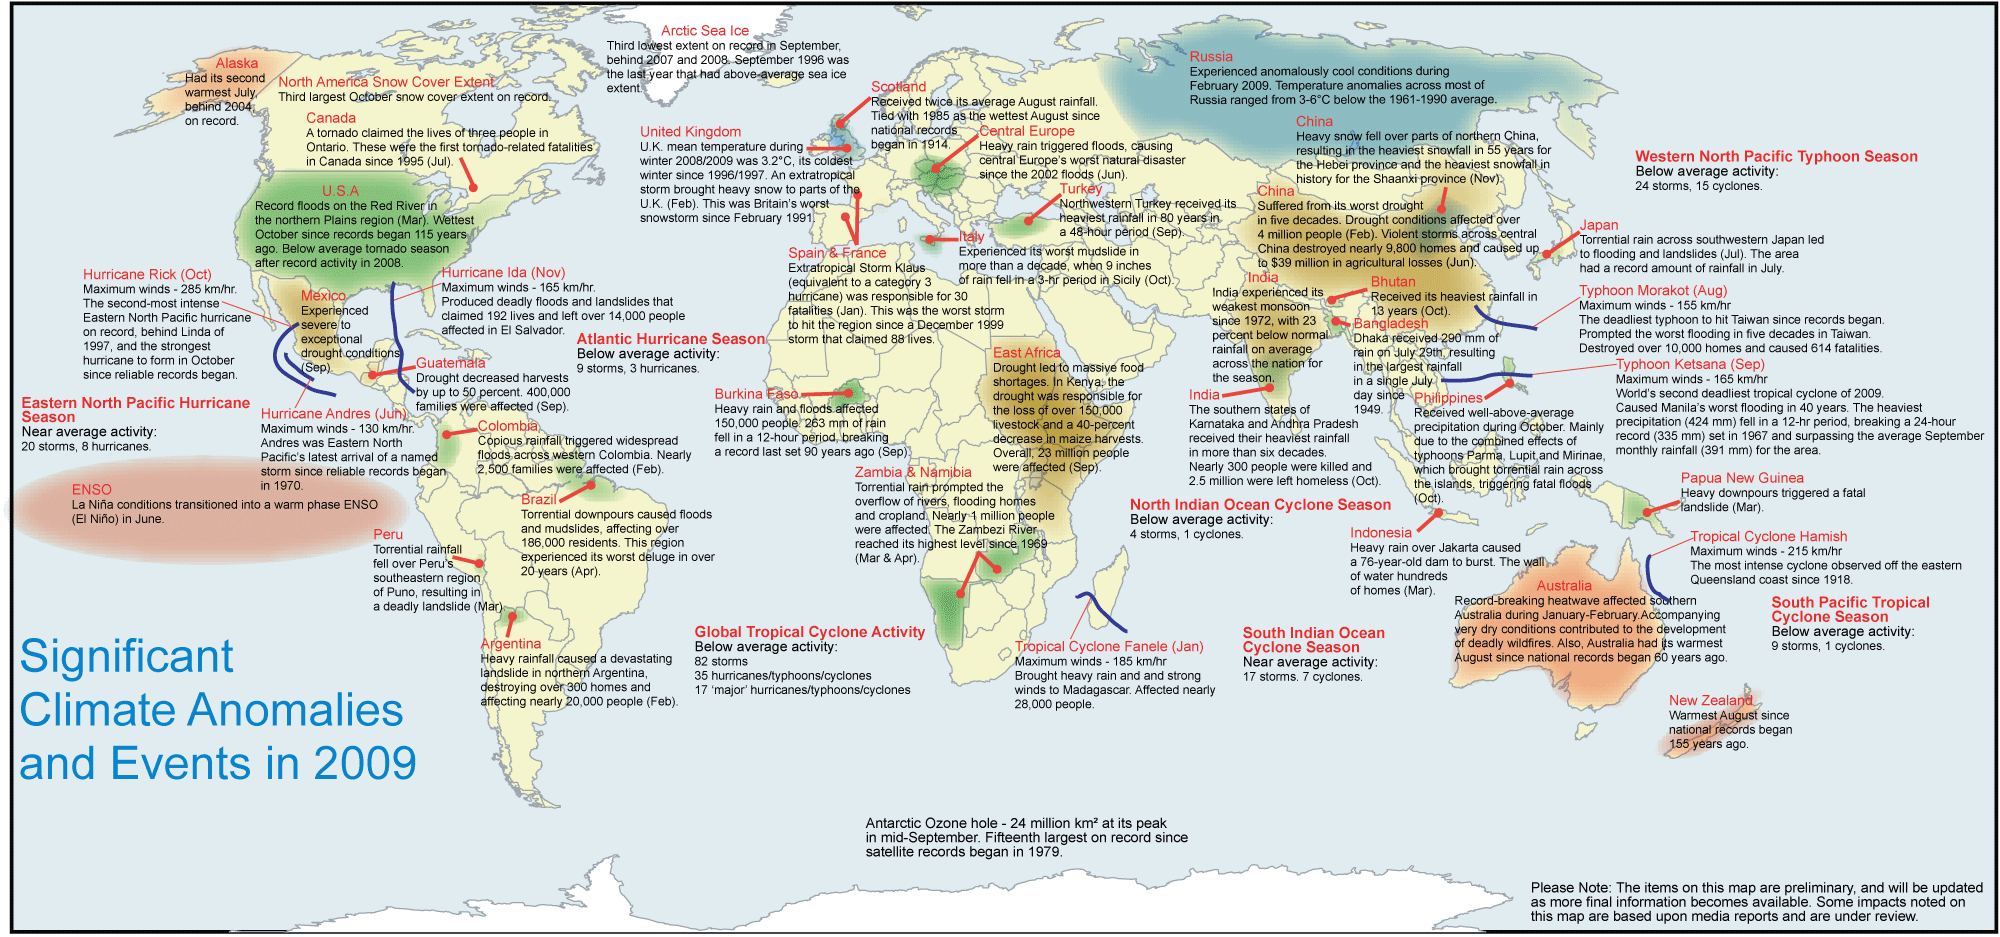 Significant Climate Anomalies and Events in 2009